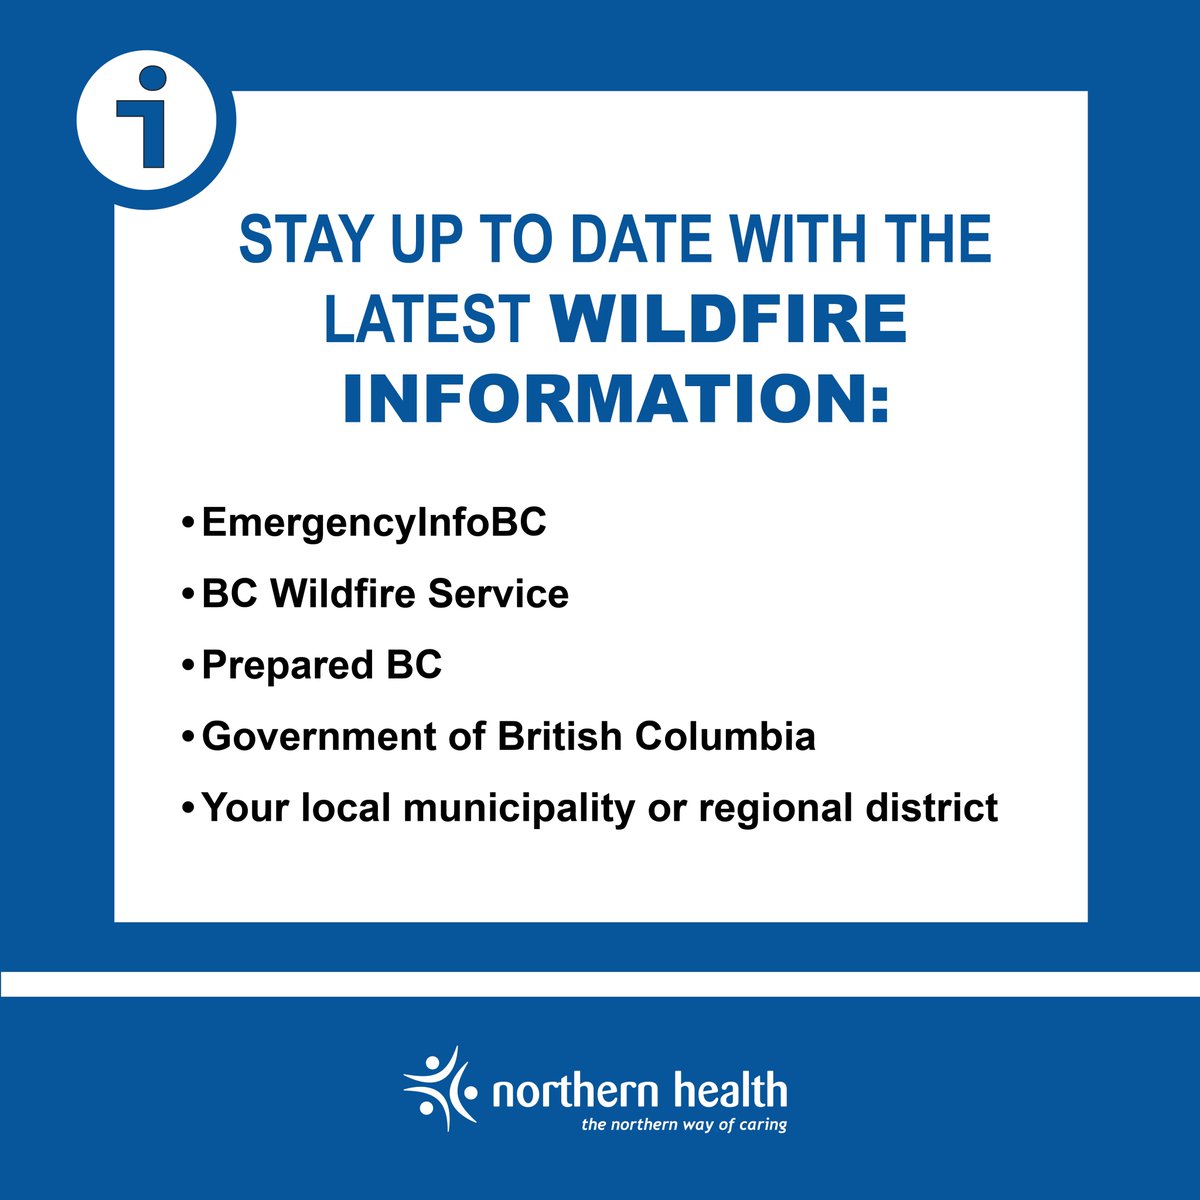 Stay up to date with the latest wildfire information - Visit your local government or regional district website. - @EmergencyInfoBC has up-to-date info on wildfire activity in the province. emergencyinfobc.gov.bc.ca